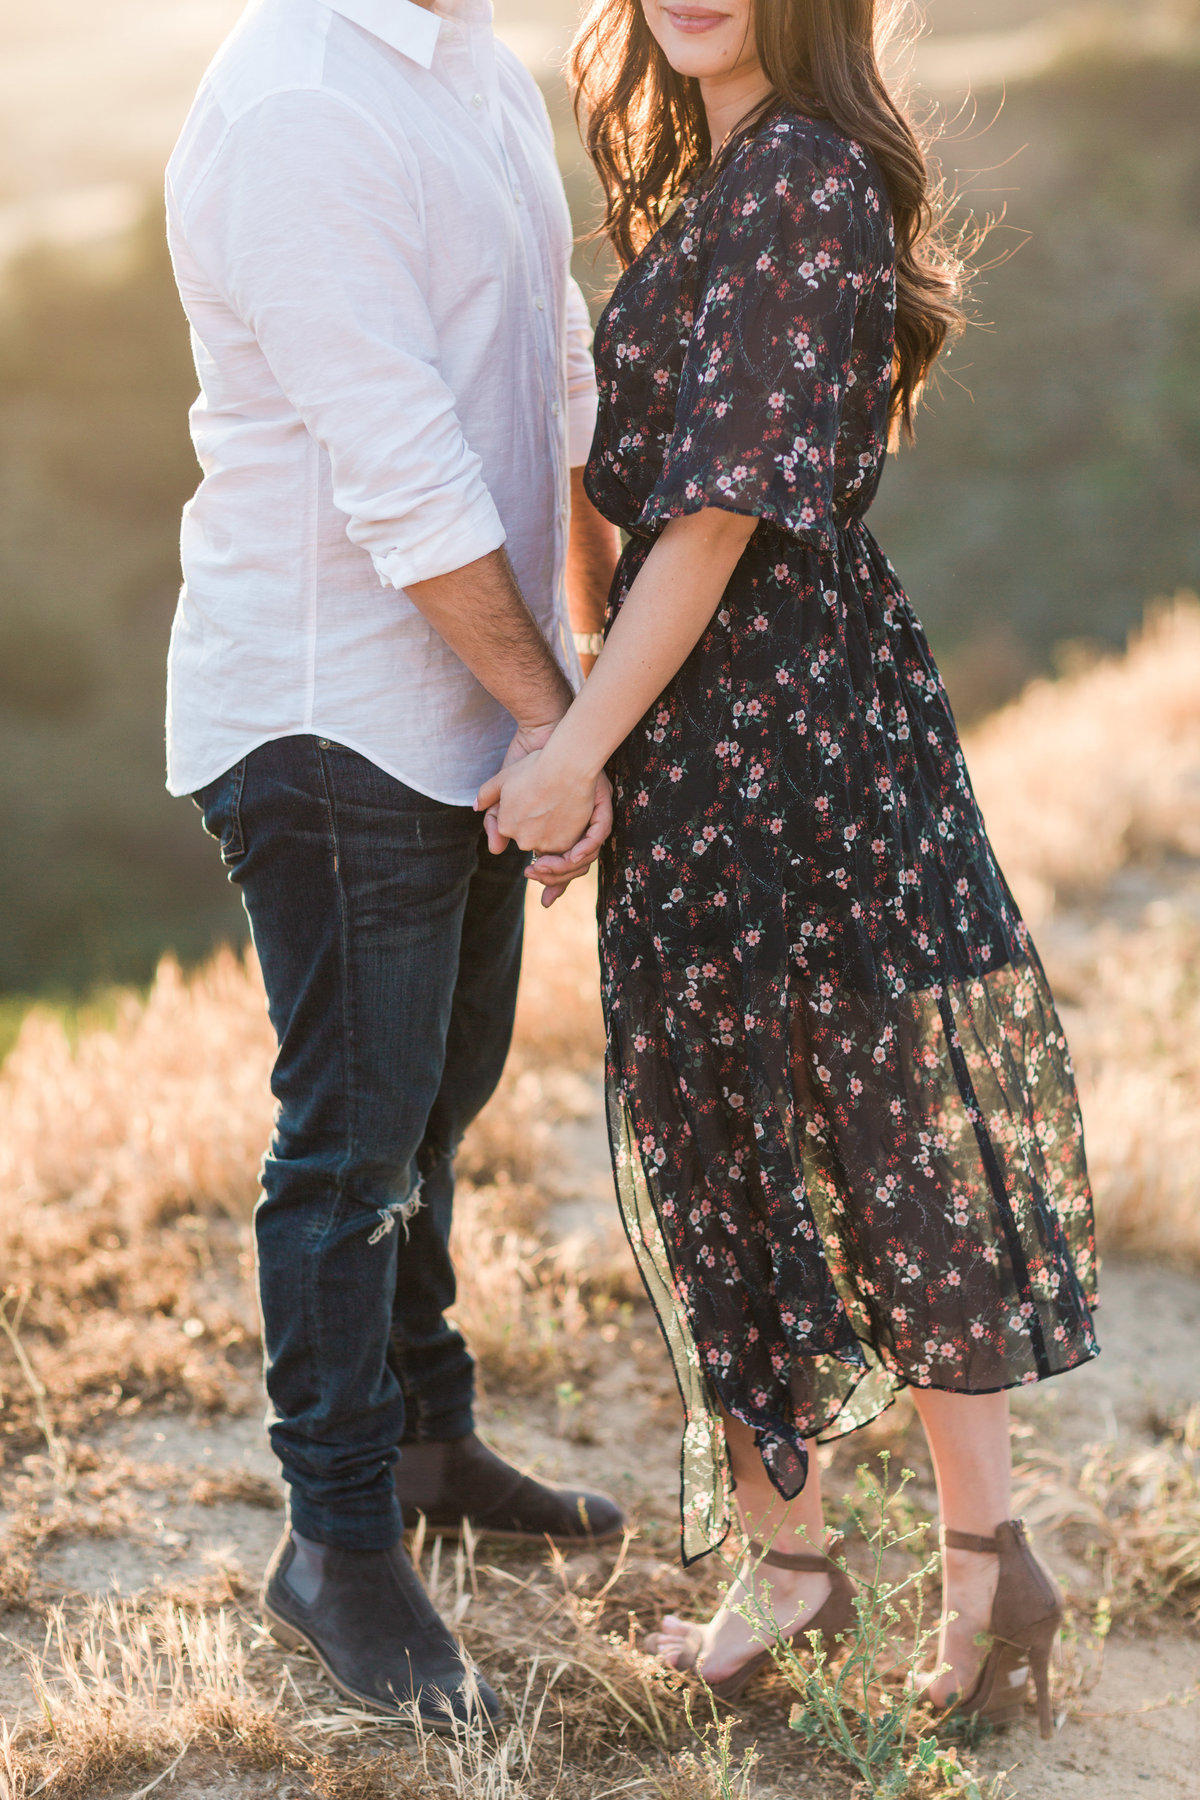 Malibu Creek State Park Engagement Session_Valorie Darling Photography-7412